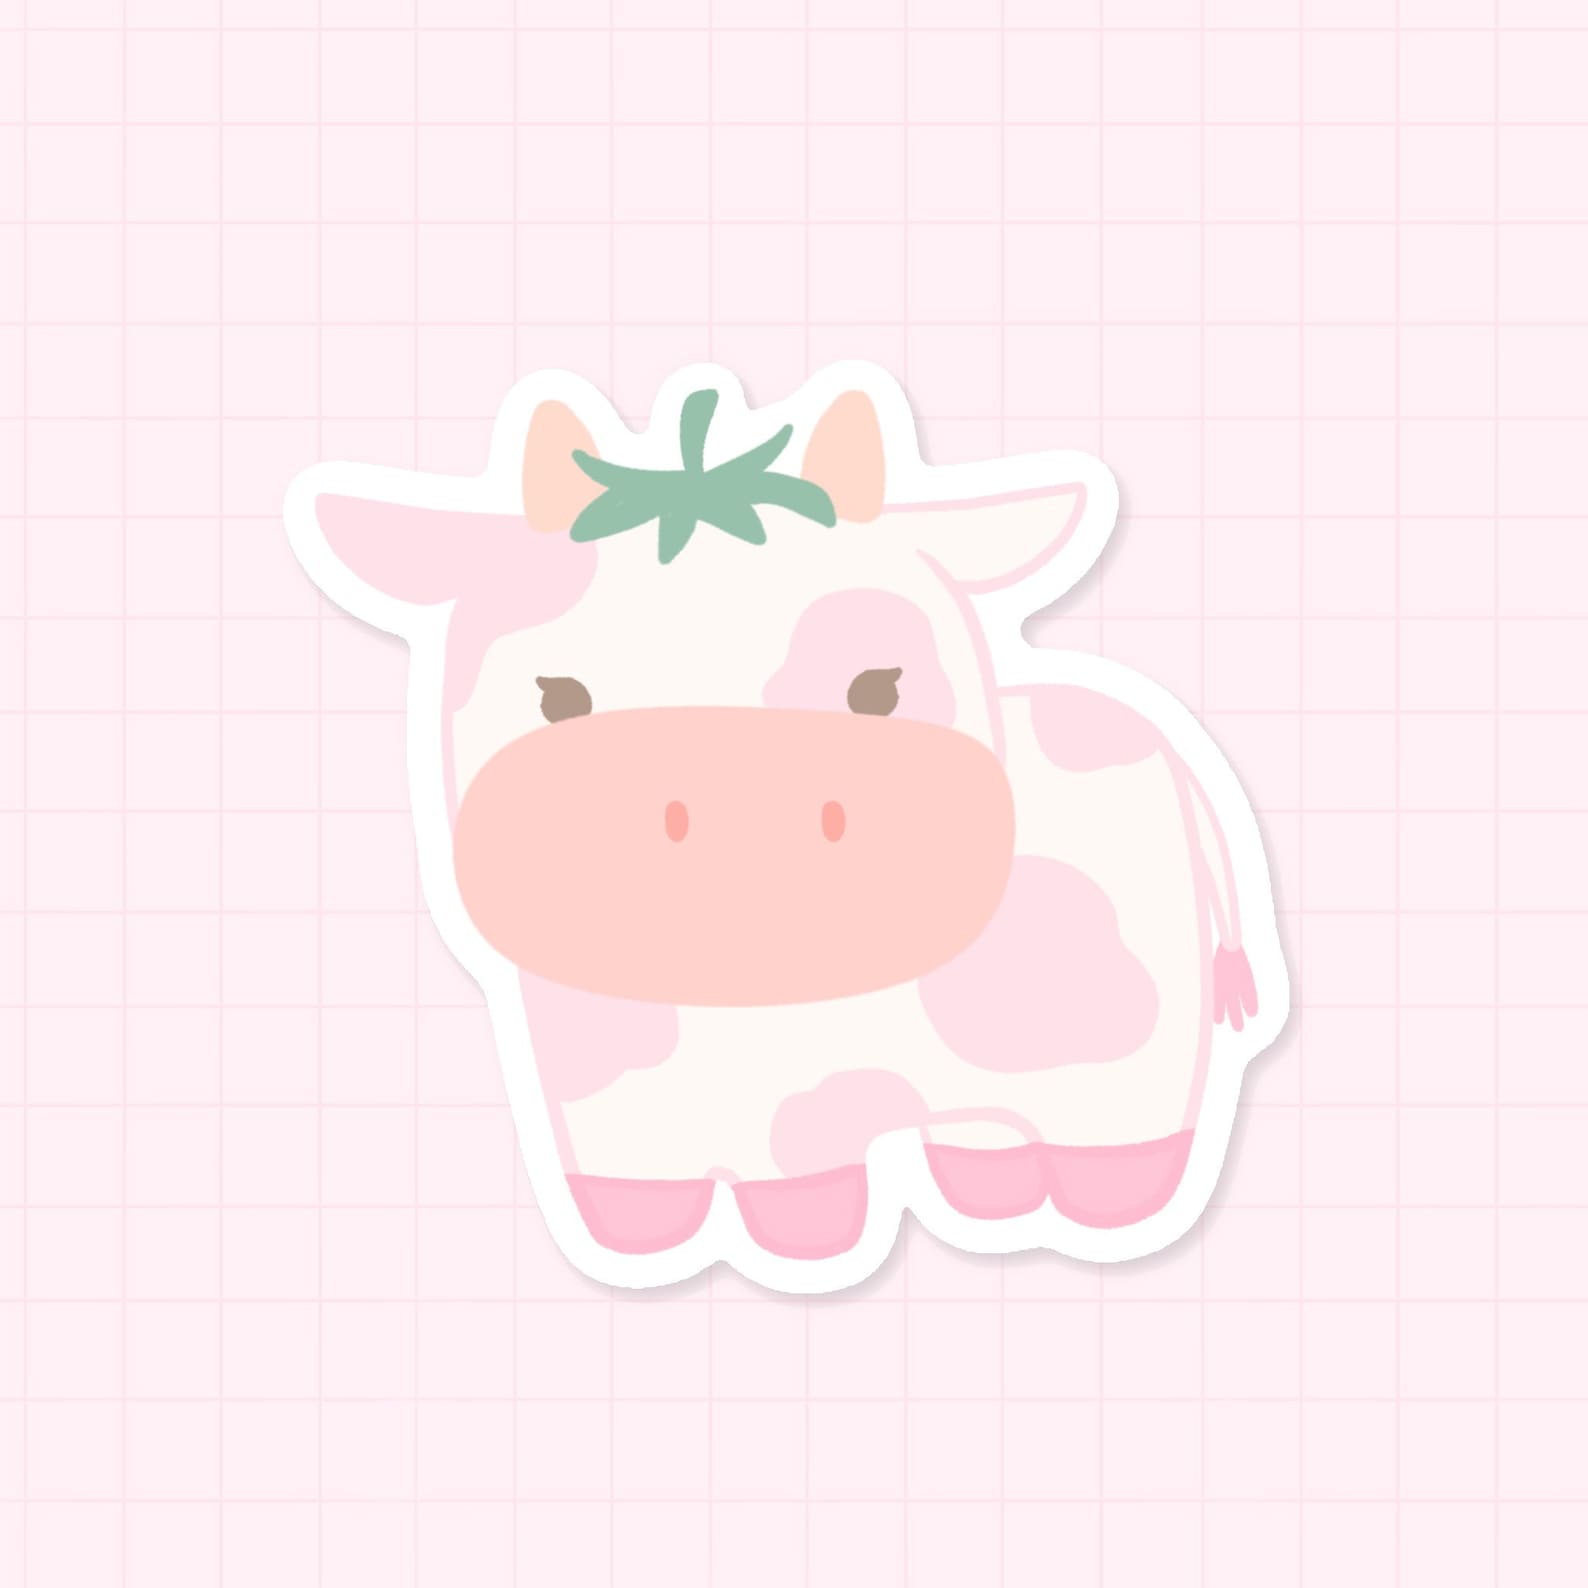 Strawberry Cow Sticker Blueberry Cow Stickers Cute Cow - Etsy